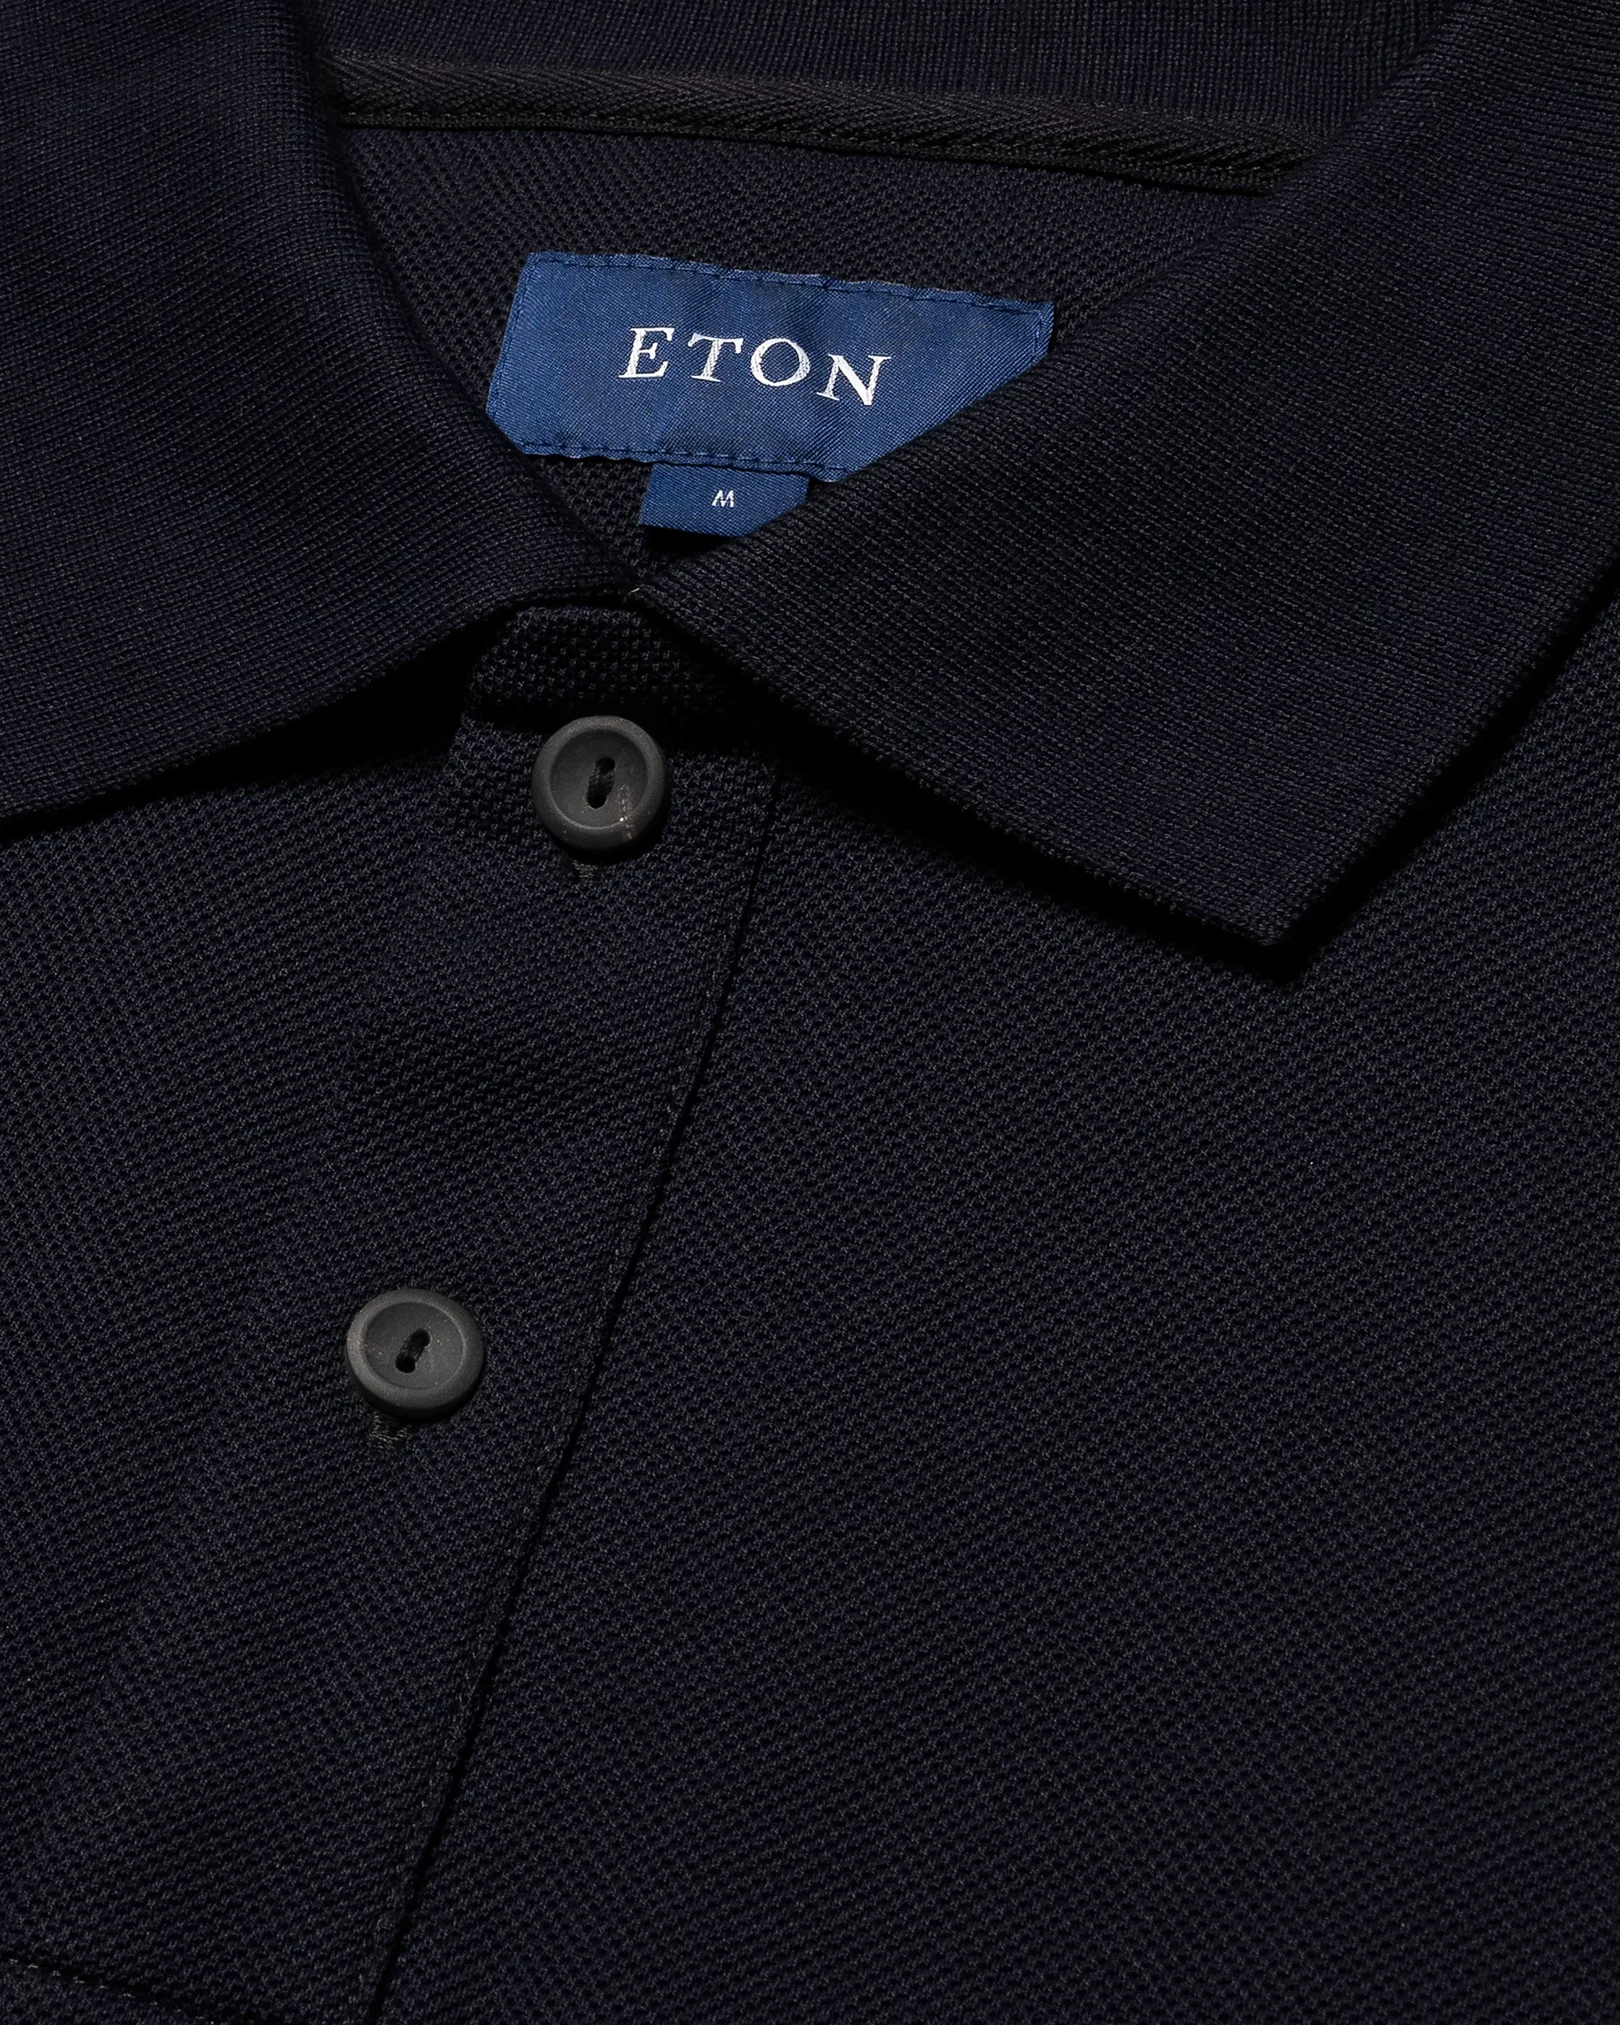 Polo Jersey Shirts for Men - Quality since 1928 - Eton